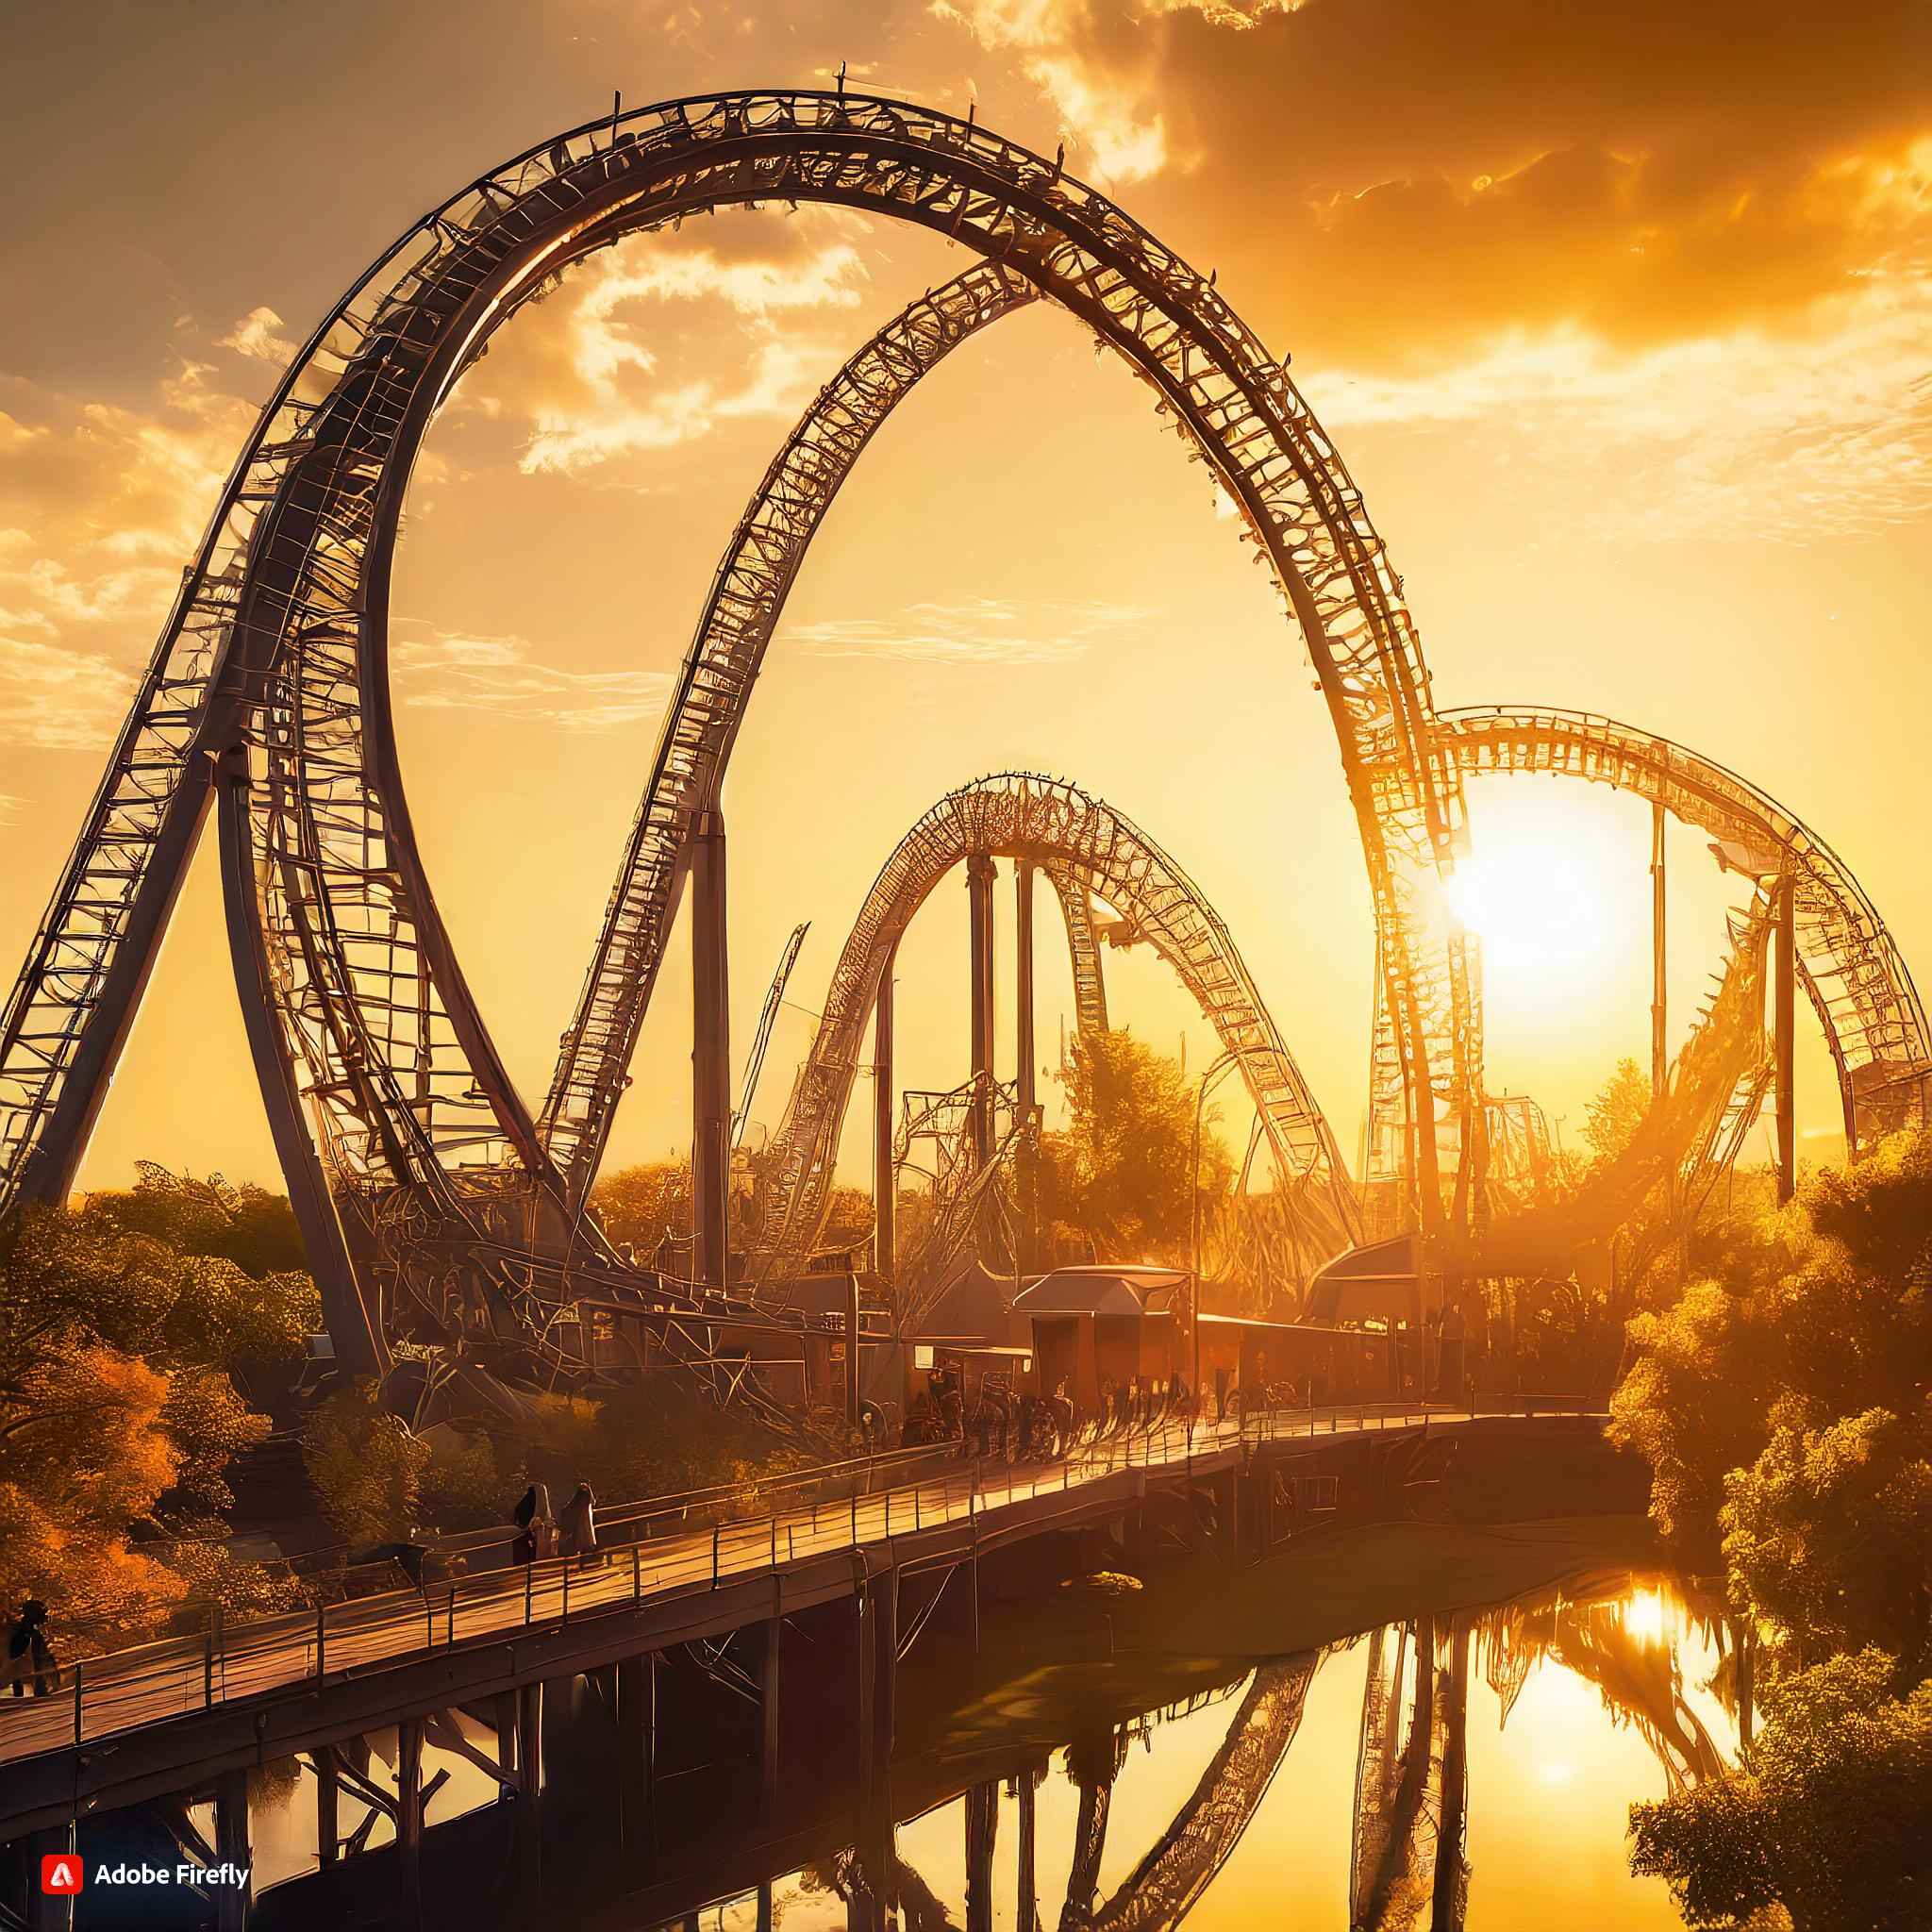 Photo of an amusement park with large steel coaster taken at sunset